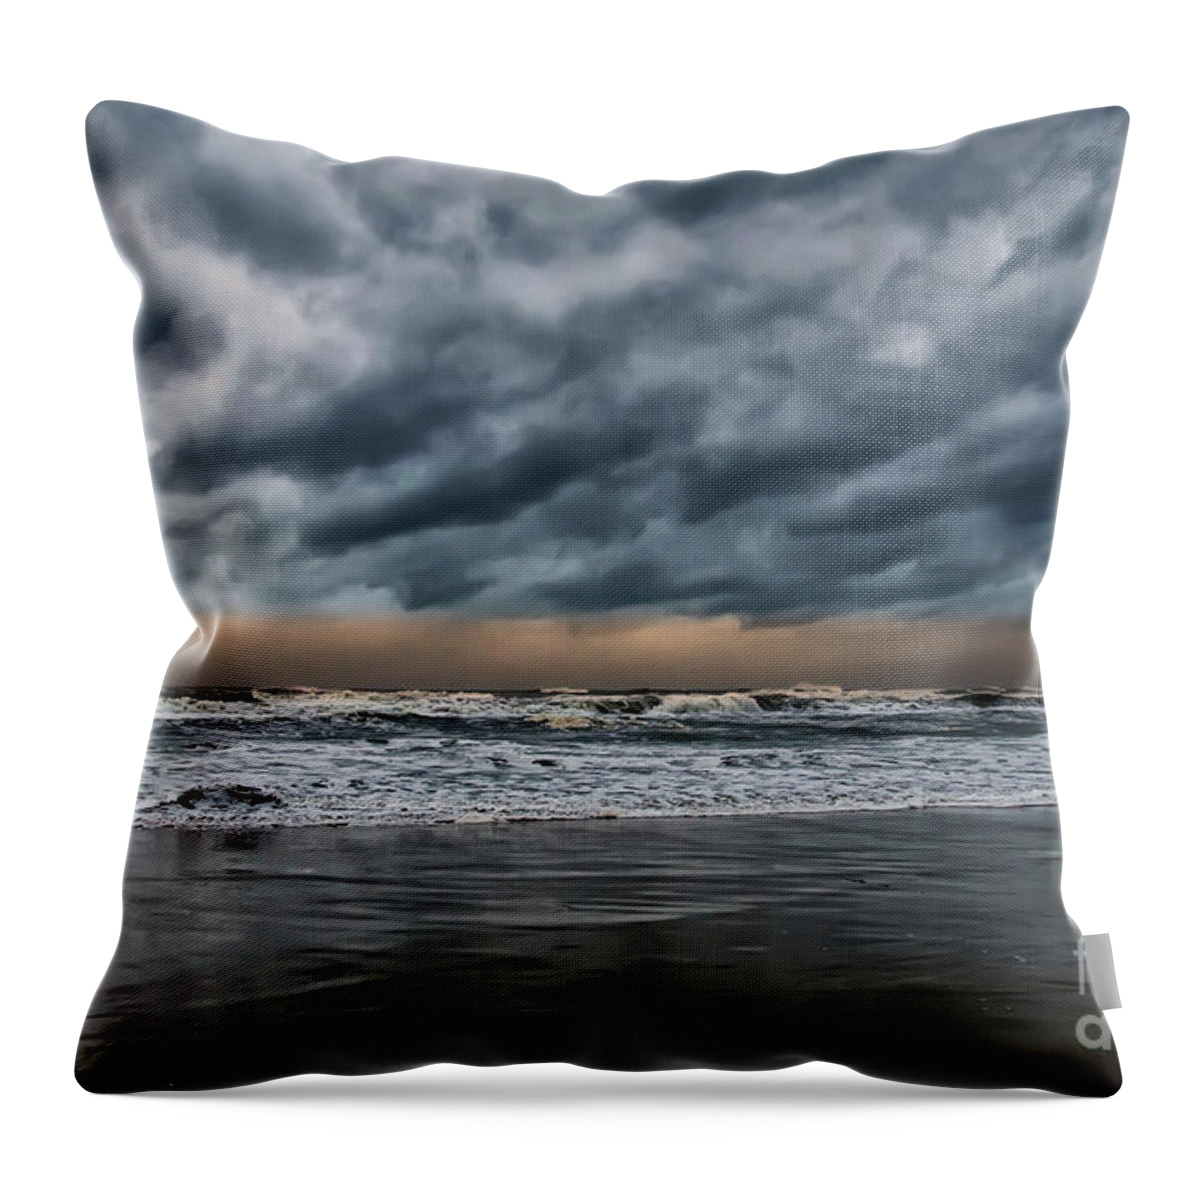 Ocean Throw Pillow featuring the photograph Here Comes The Hurricane by Lois Bryan